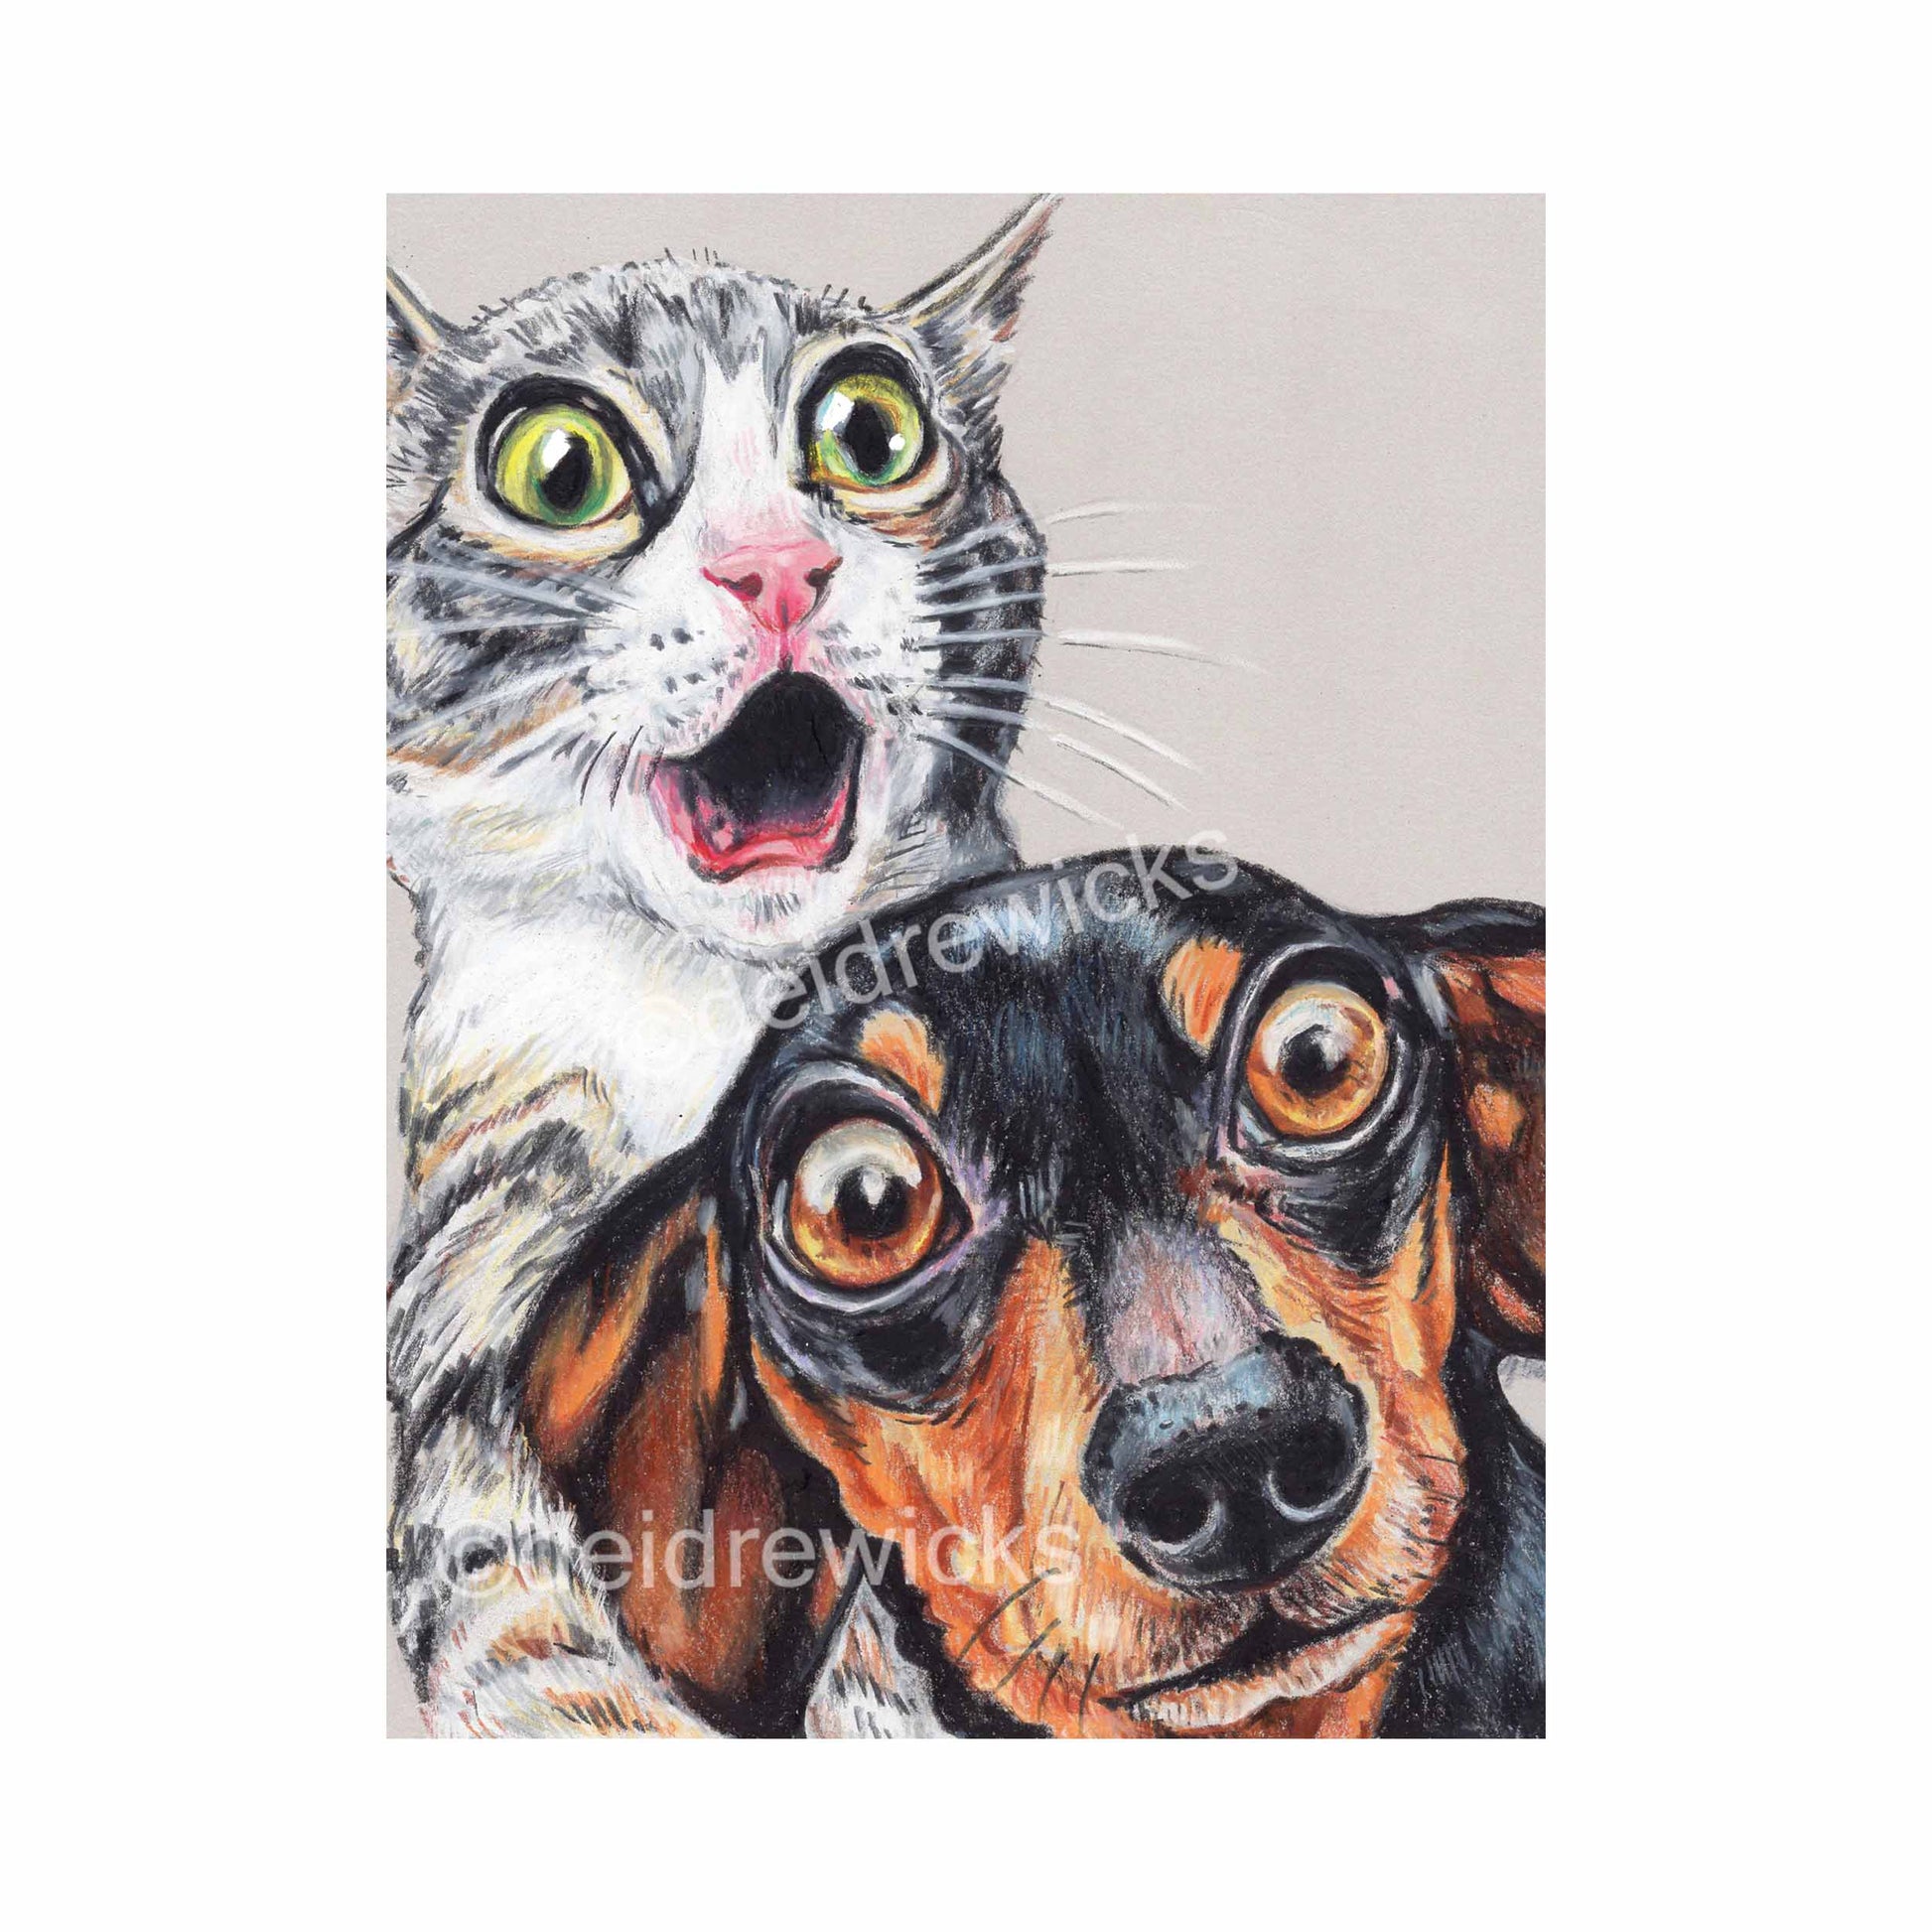 Crayon drawing of a shocked grey tabby kitten and her dachshund buddy